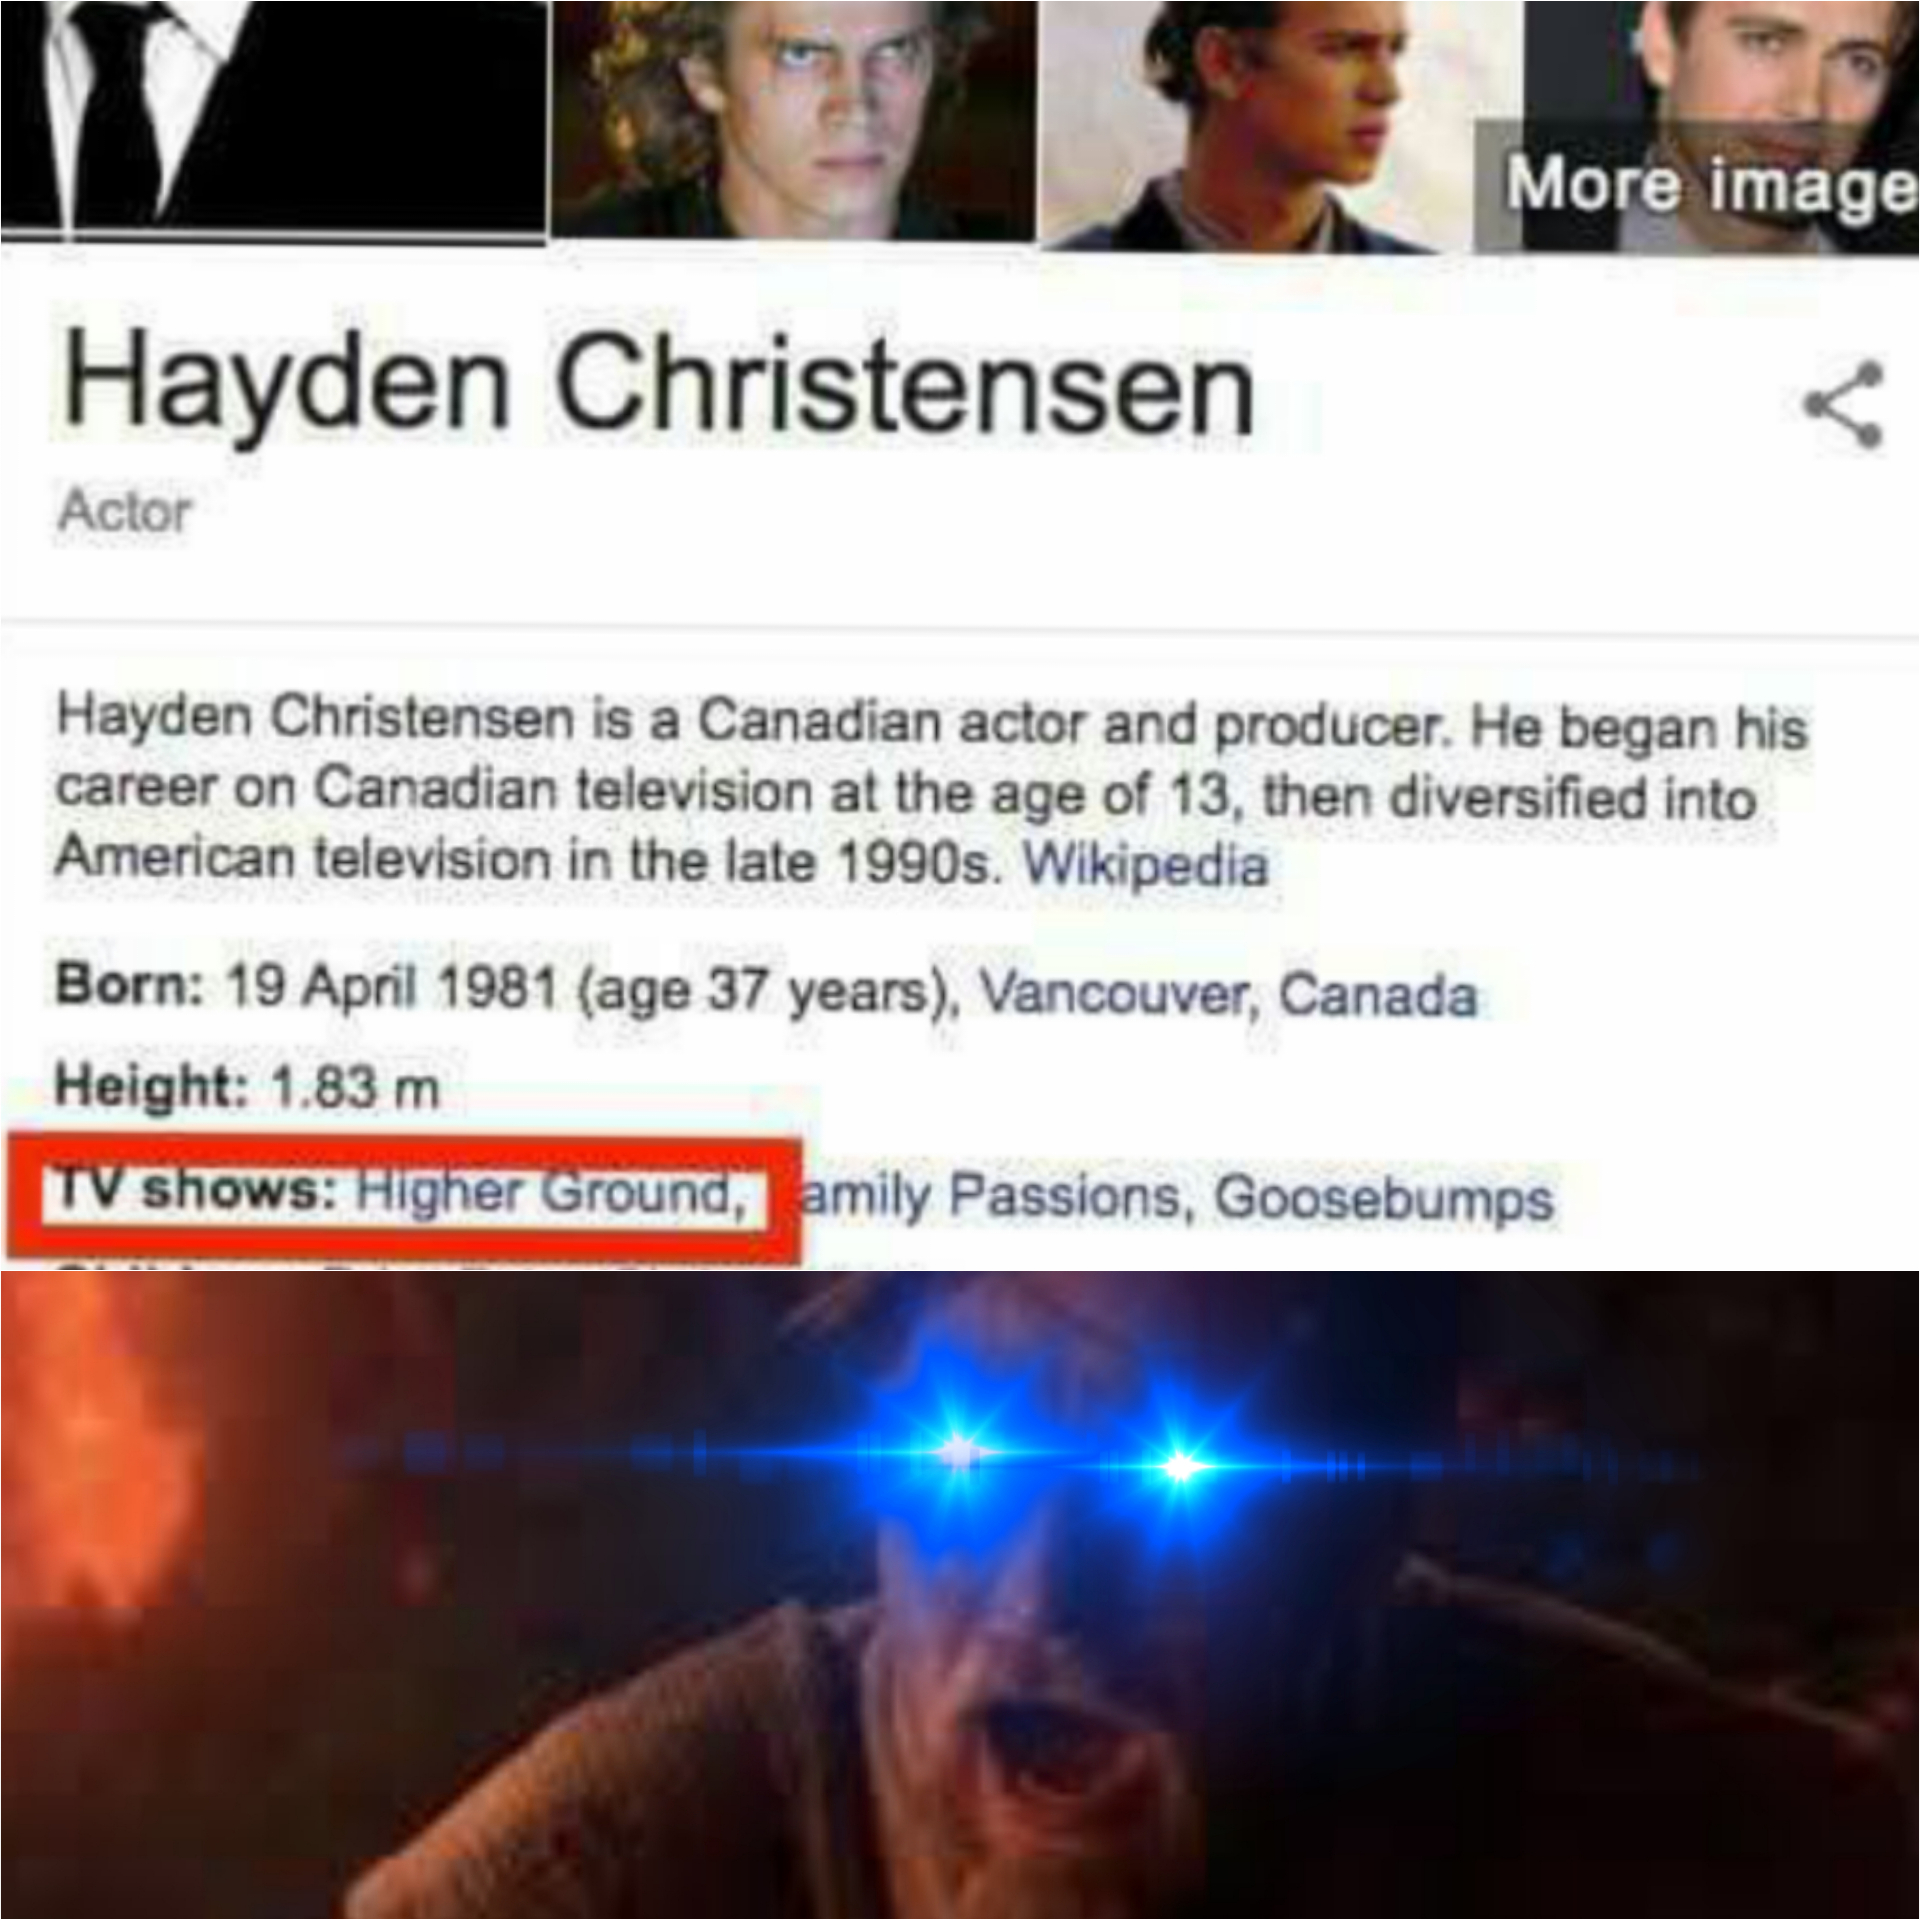 video - More image Hayden Christensen Actor Hayden Christensen is a Canadian actor and producer. He began his career on Canadian television at the age of 13, then diversified into American television in the late 1990s. Wikipedia Born age 37 years, Vancouv